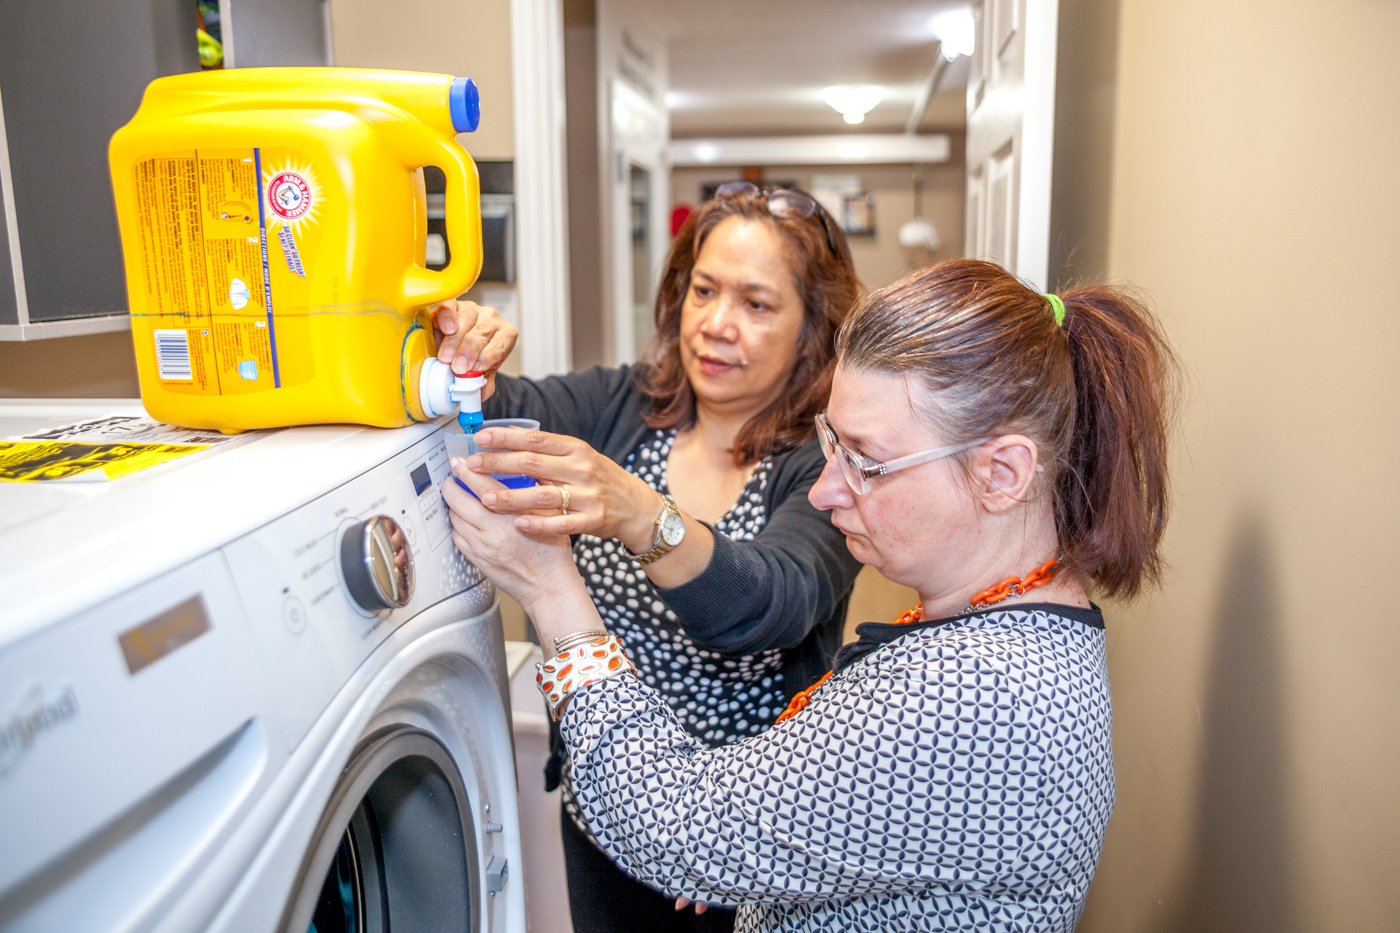 Intervenor assists woman with pouring laundry detergent, supporting her in doing laundry more independently.